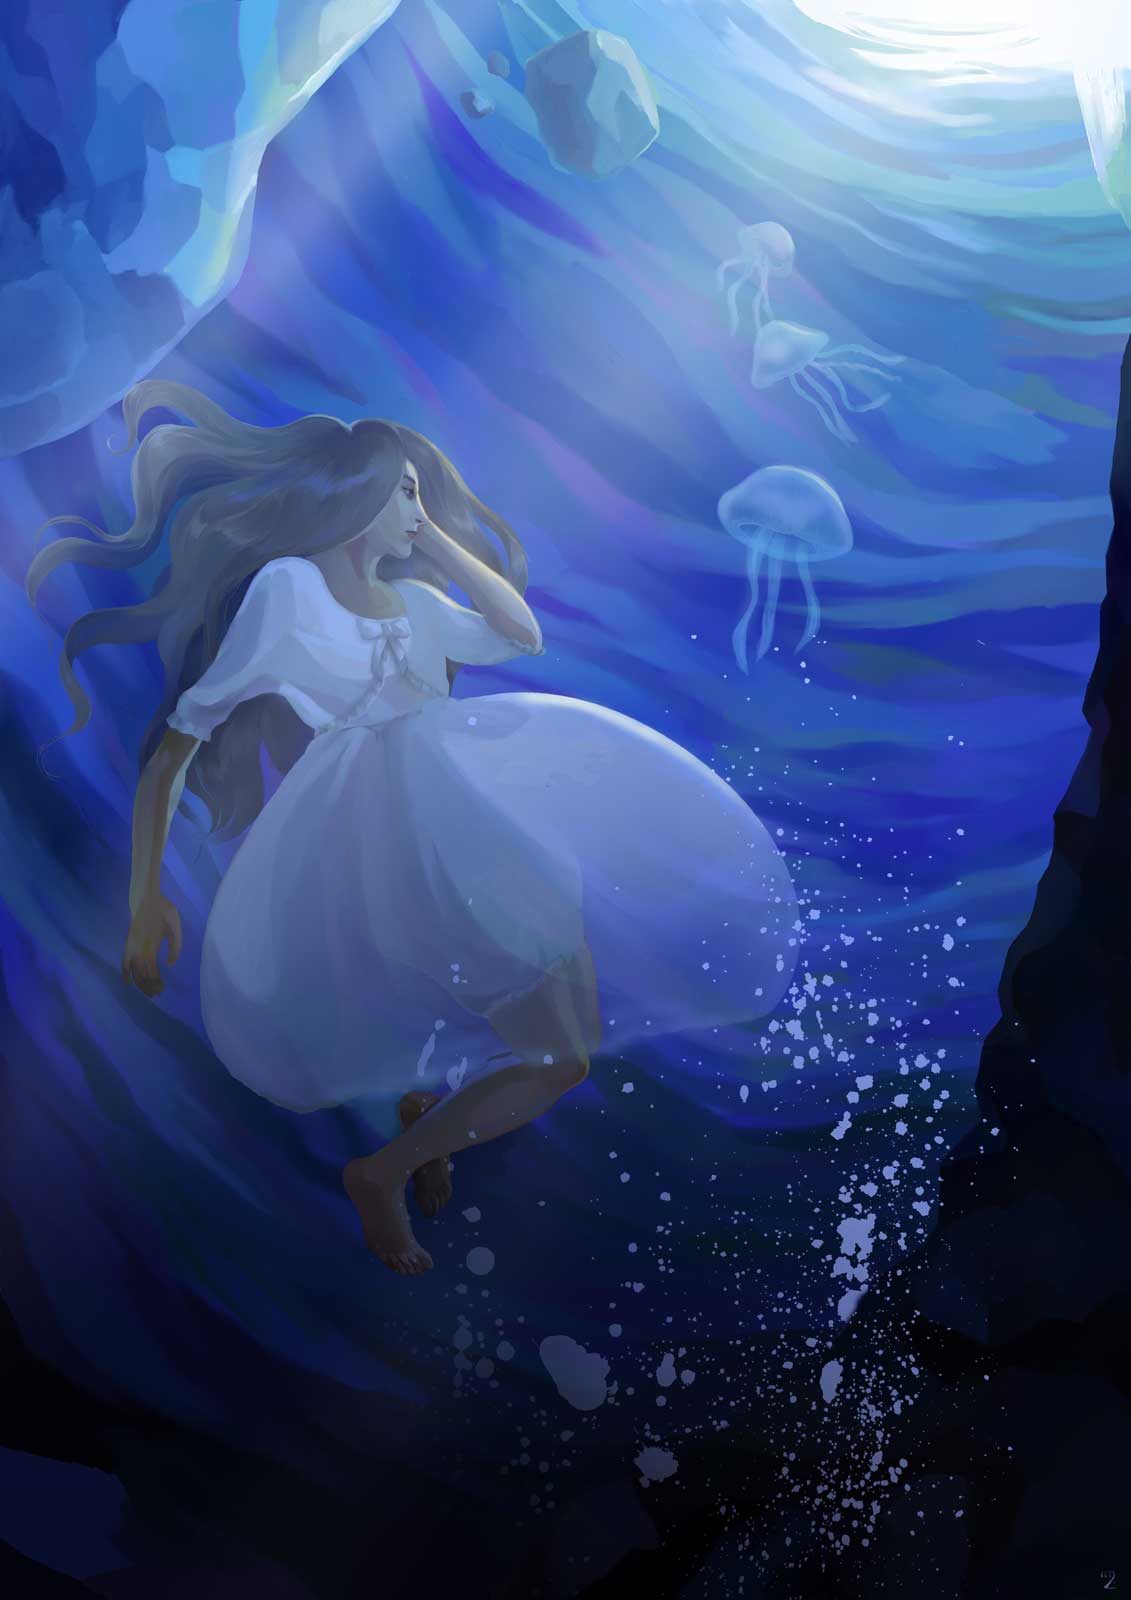 Inspired by lolita fashion silhouette, portrait of a girl in a dress that imitates jellyfishes in the deep blue sea.